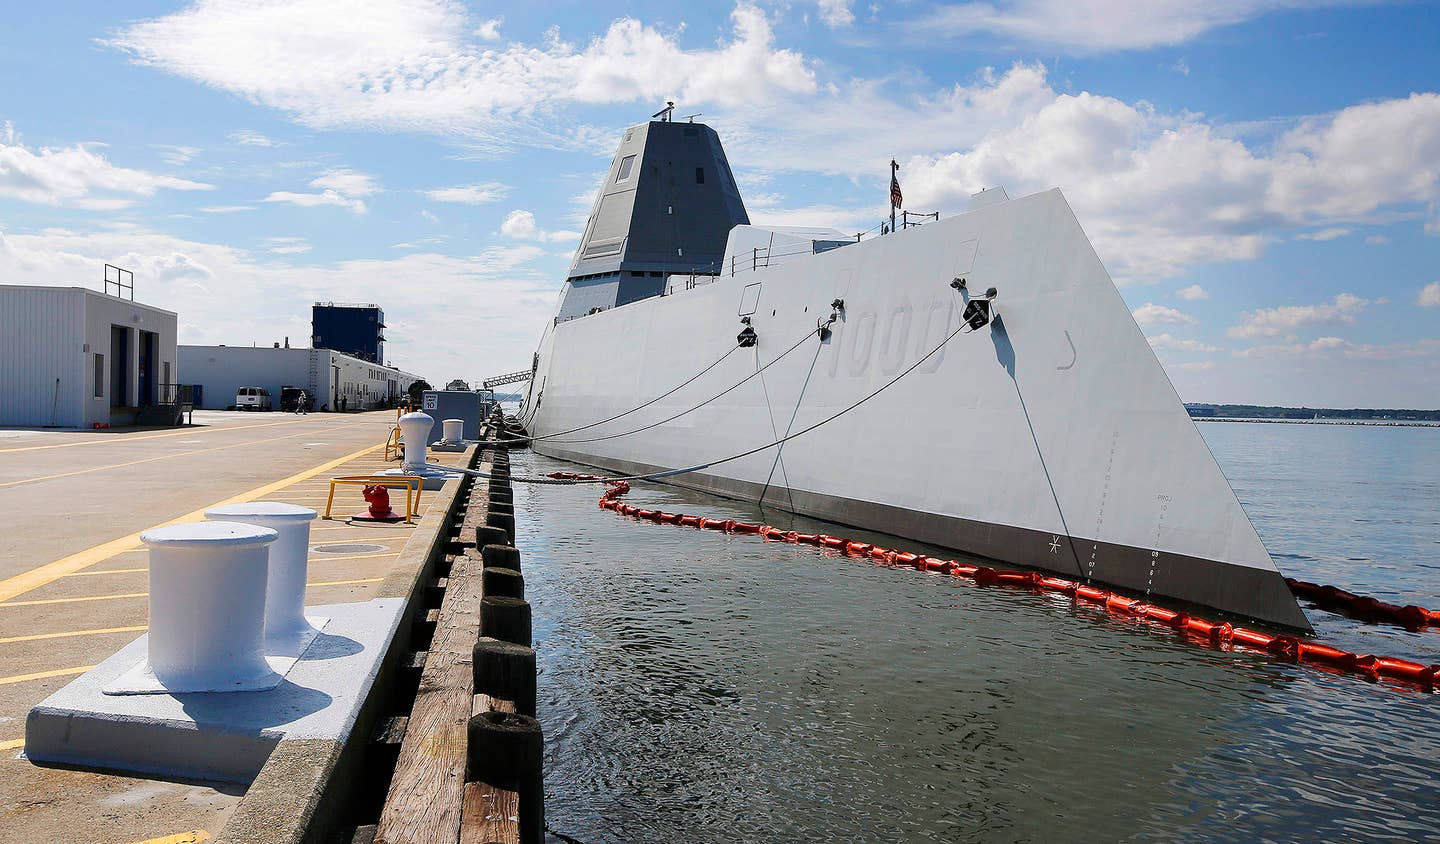 Check Out These Detailed Images Taken Aboard the Navy&#8217;s New Stealth Destroyer